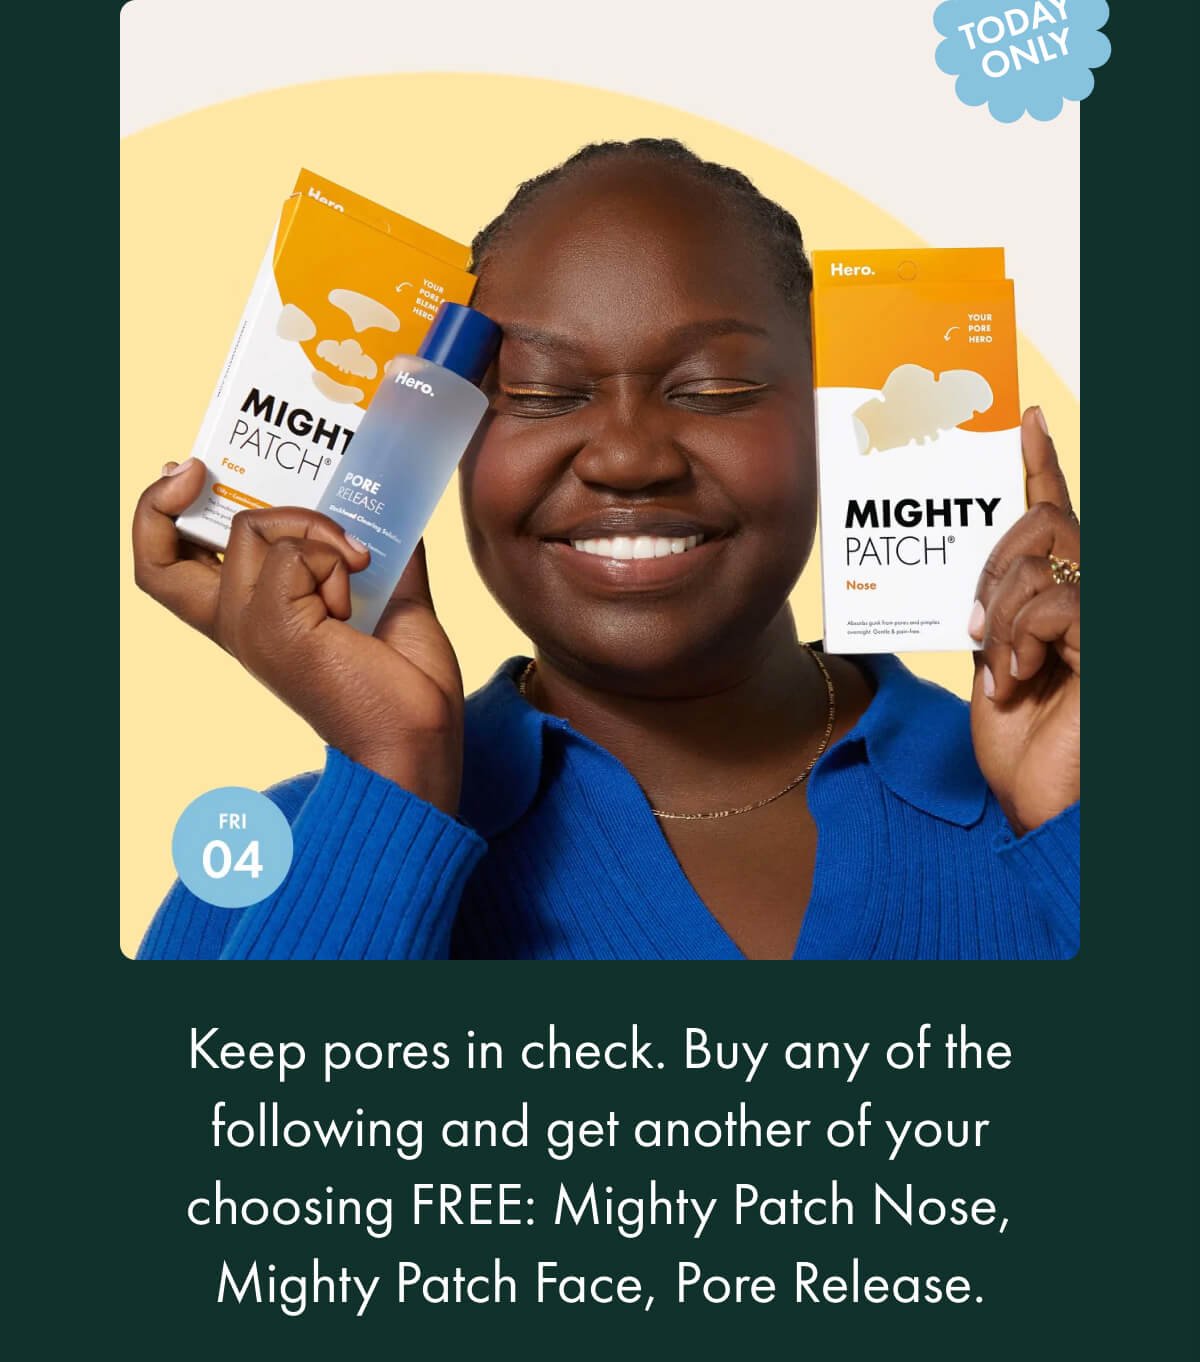 Keep pores in check, Buy any of the following and get another of your choosing free: Mighty Patch Nose, Mighty Patch Face, Pore Release.